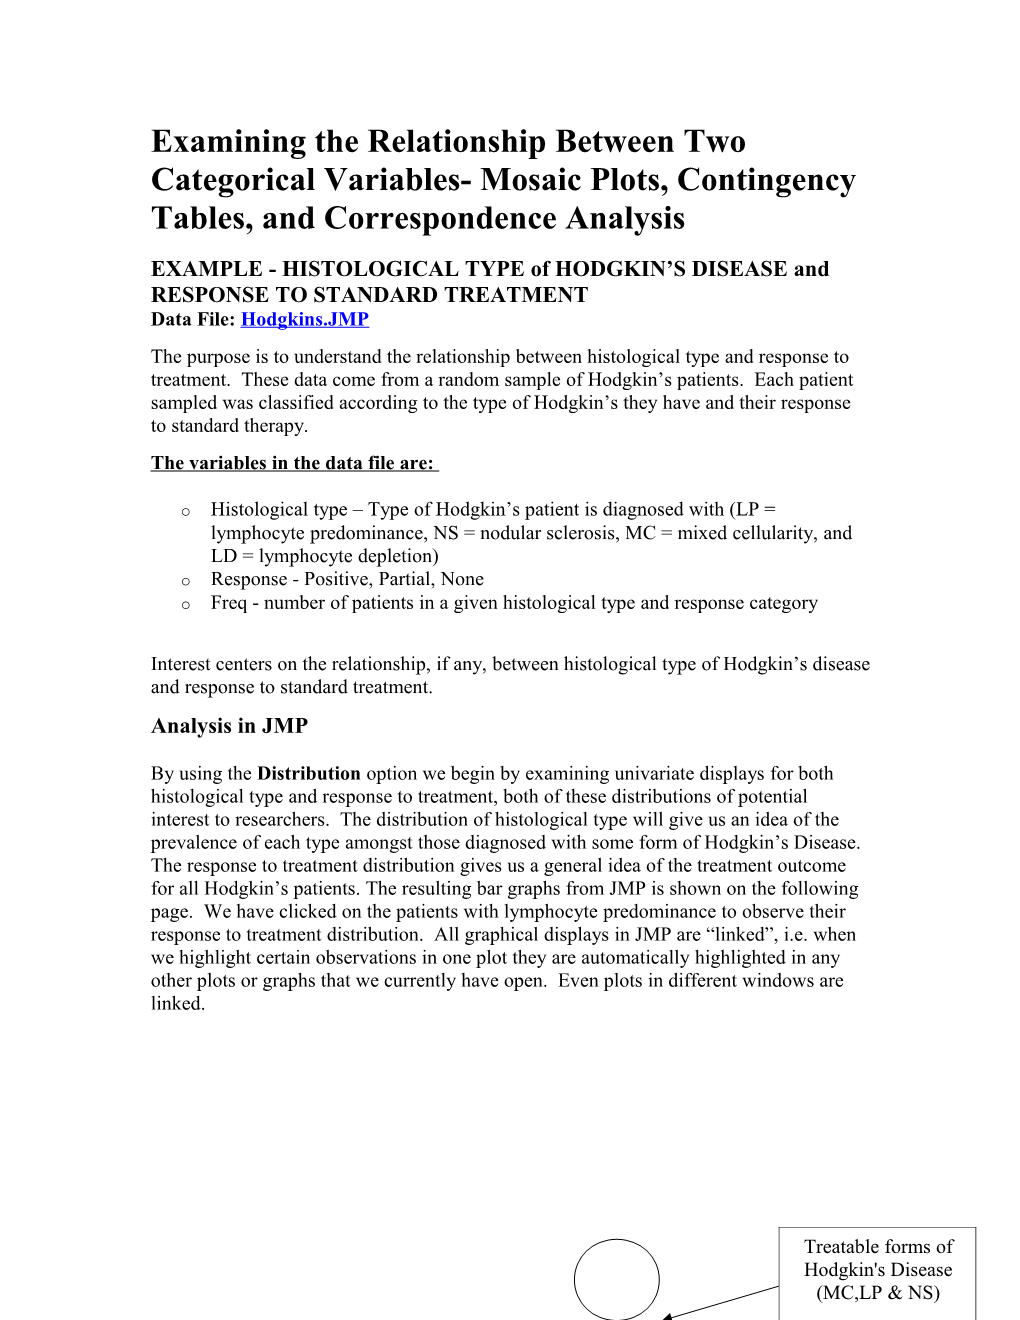 Bivariate Displays for Categorical Data, Contingency Tables and Correspondence Analysis